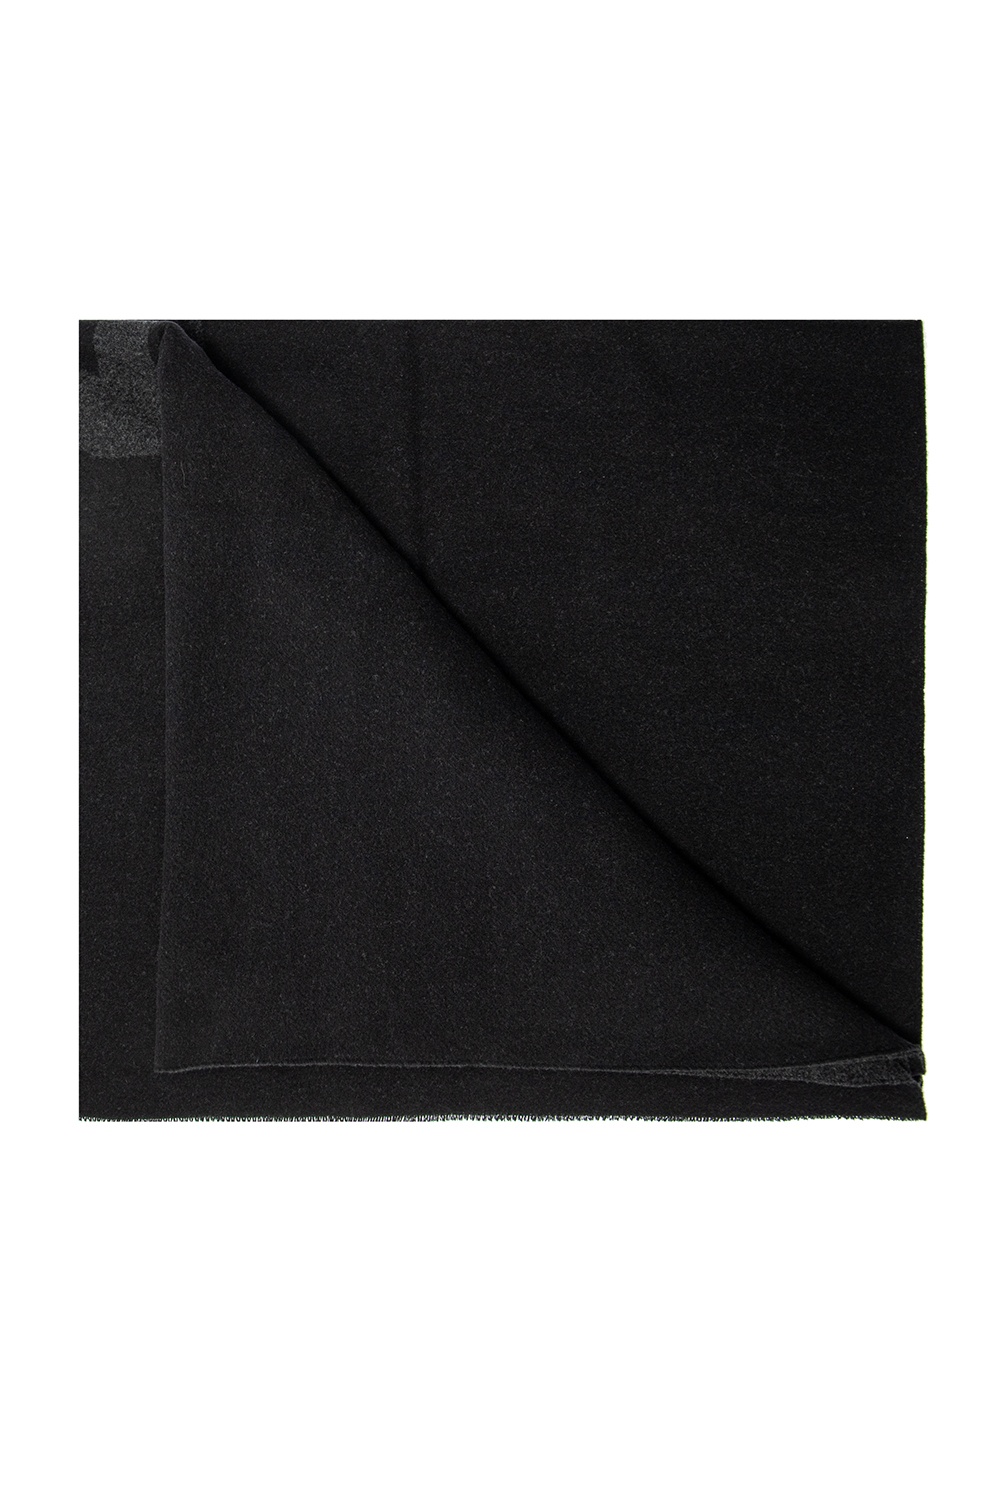 Fear Of God Zegna Wool scarf with logo | Men's Accessories | Vitkac